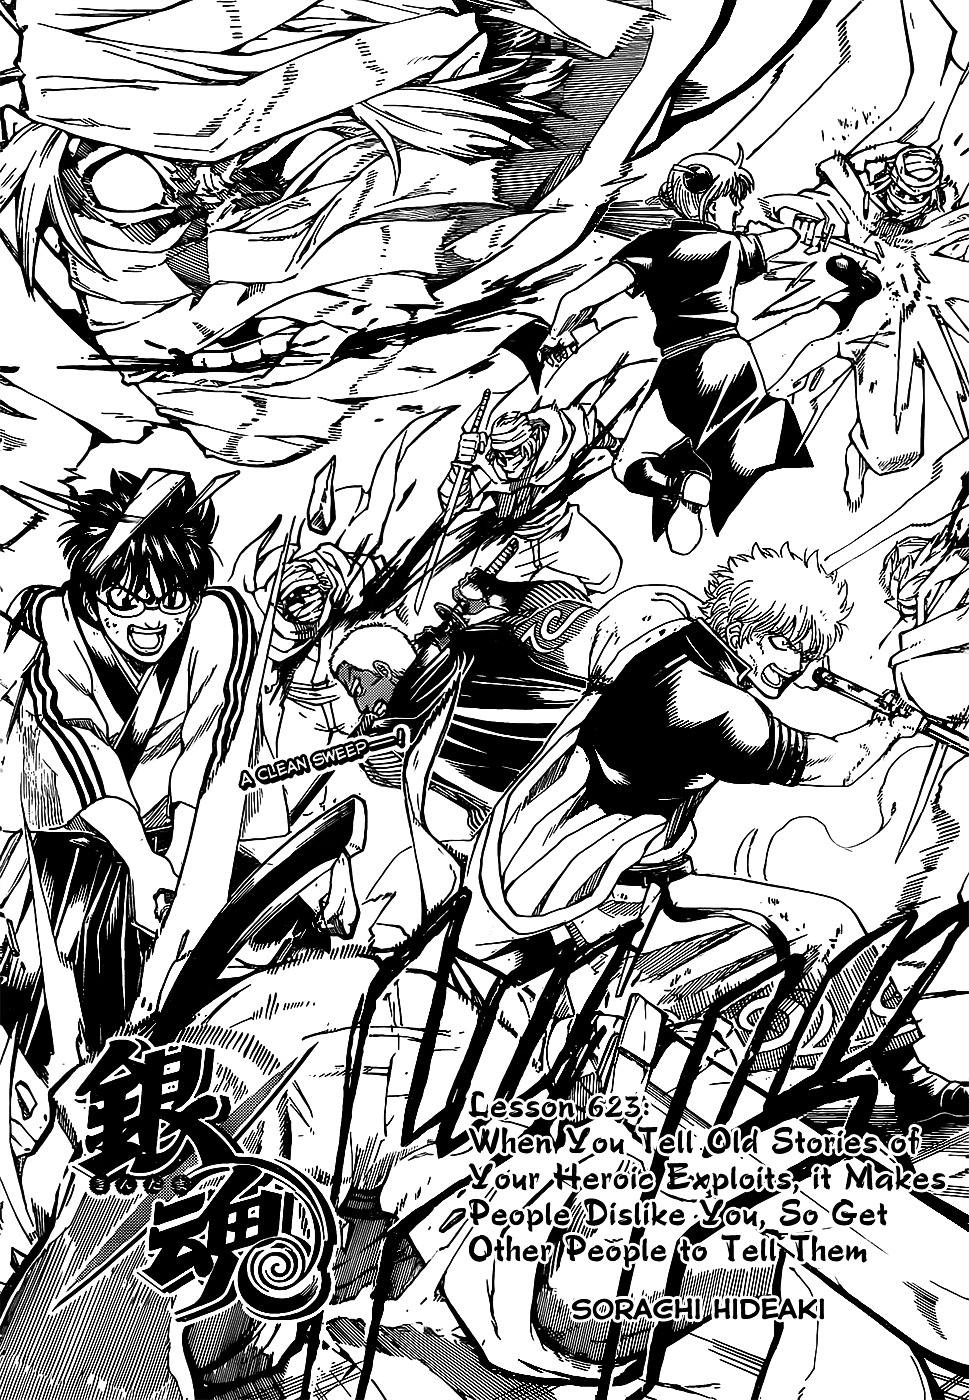 Gintama Vol.69 Chapter 623 V2 : When You Tell Old Stories Of Your Heroic Exploits, It Makes People D... - Picture 2